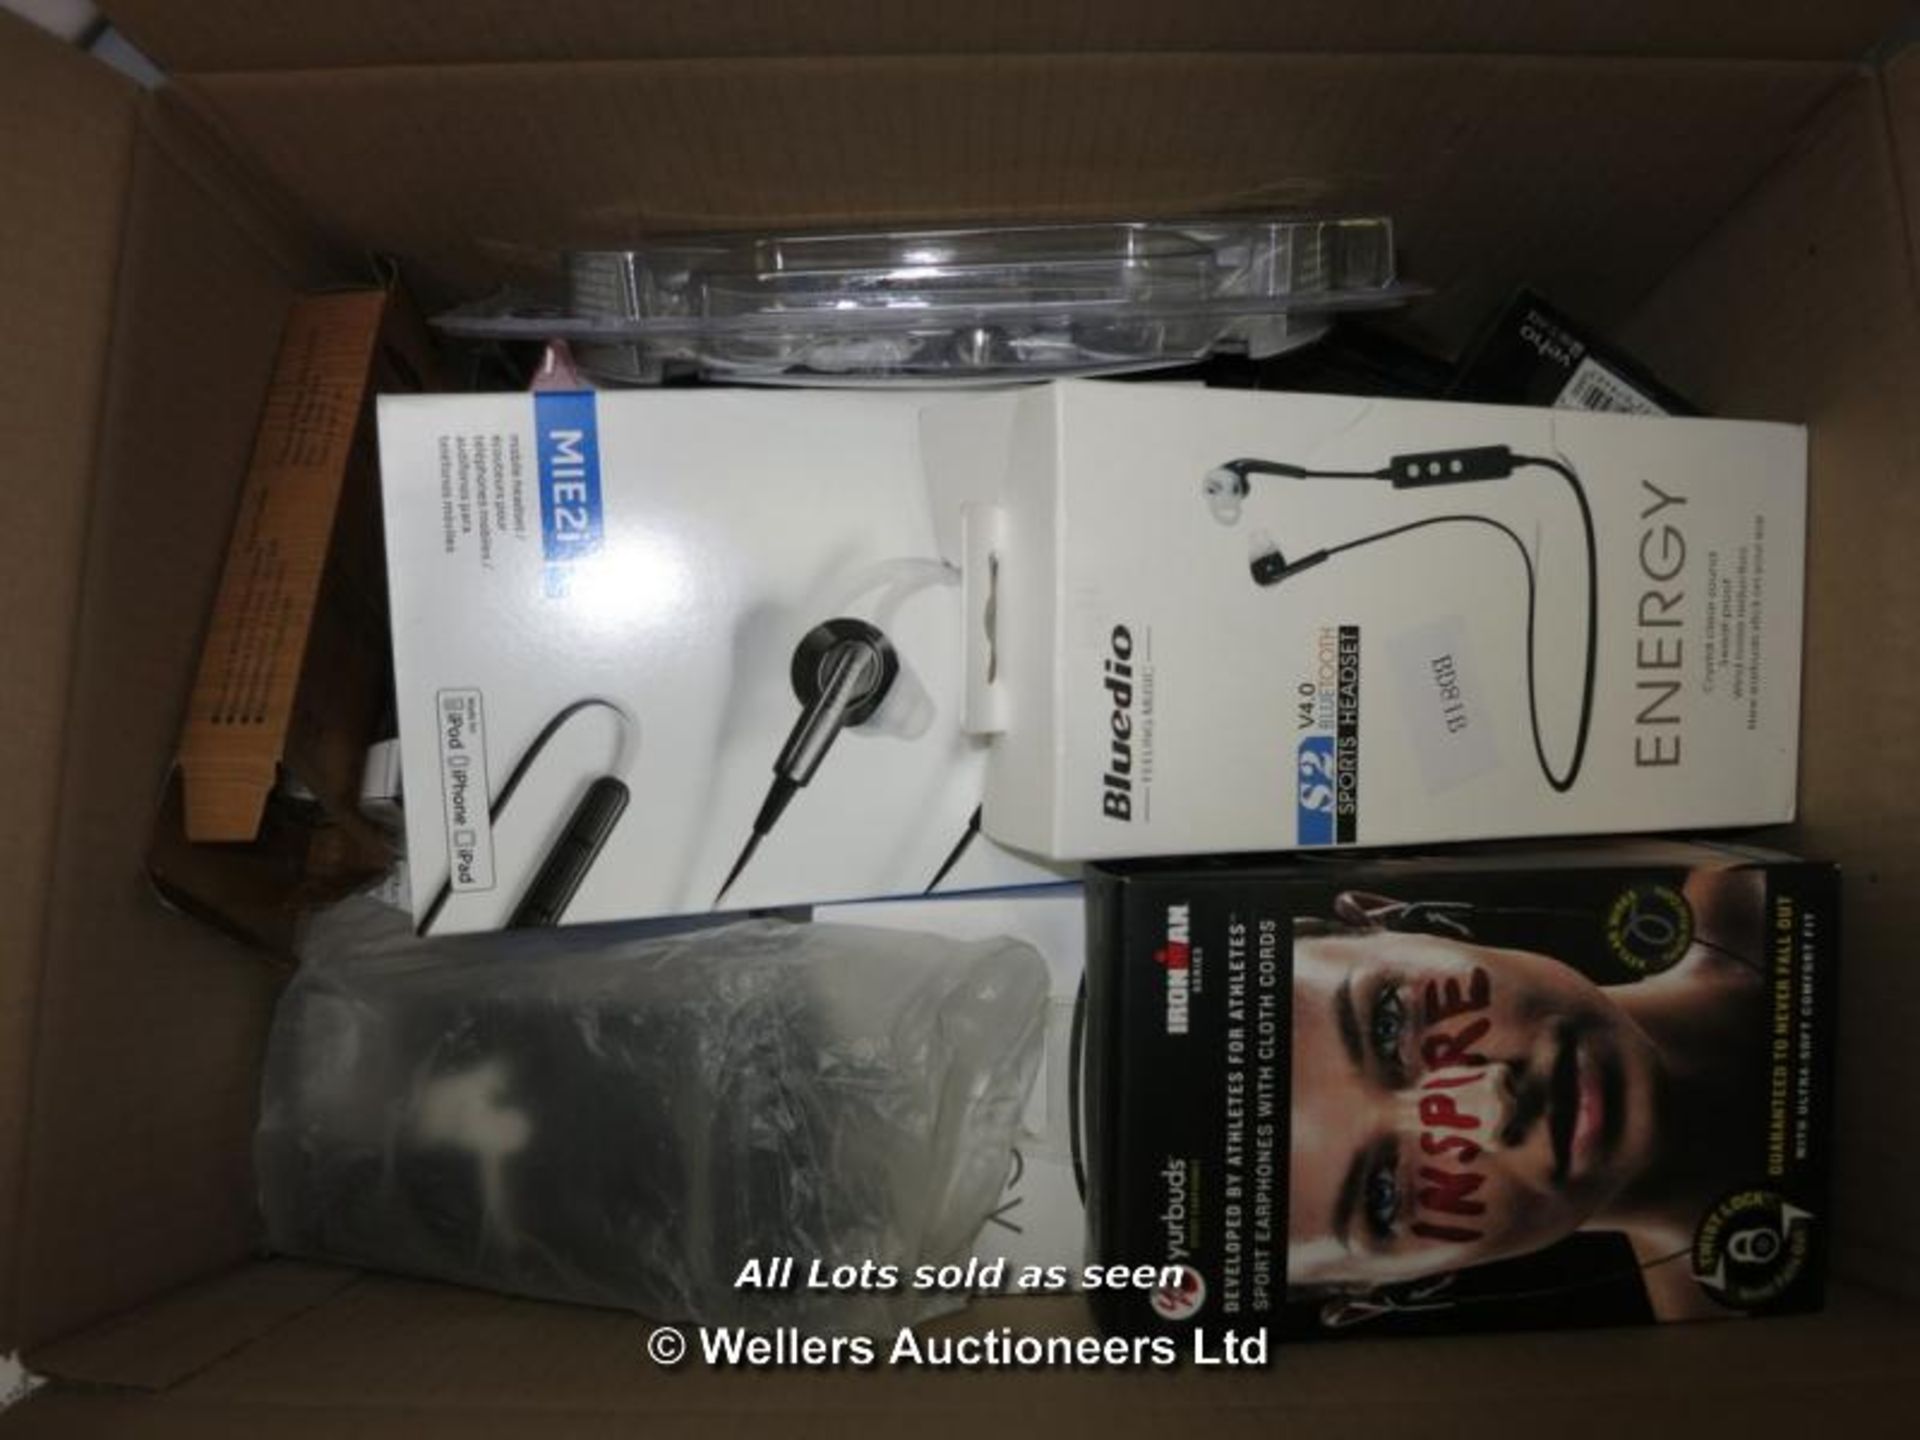 20X HEADPHONES (AS PACKAGED) / GRADE: UNCLAIMED PROPERTY / BOXED (DC2){YT00522754GB[MK290715]